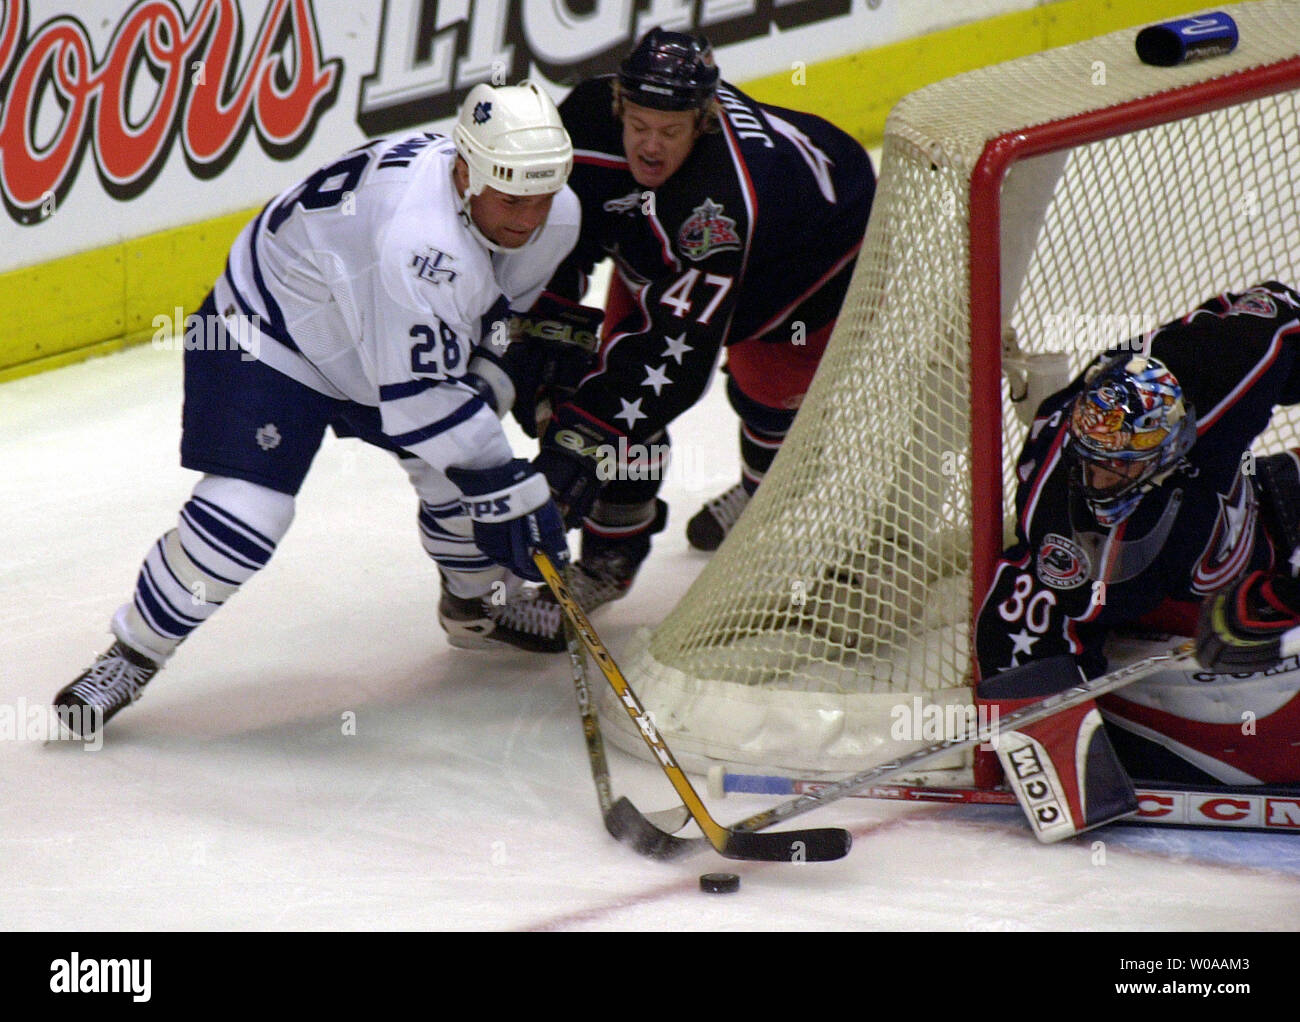 Former Maple Leafs enforcer Tie Domi to publish his memoir for